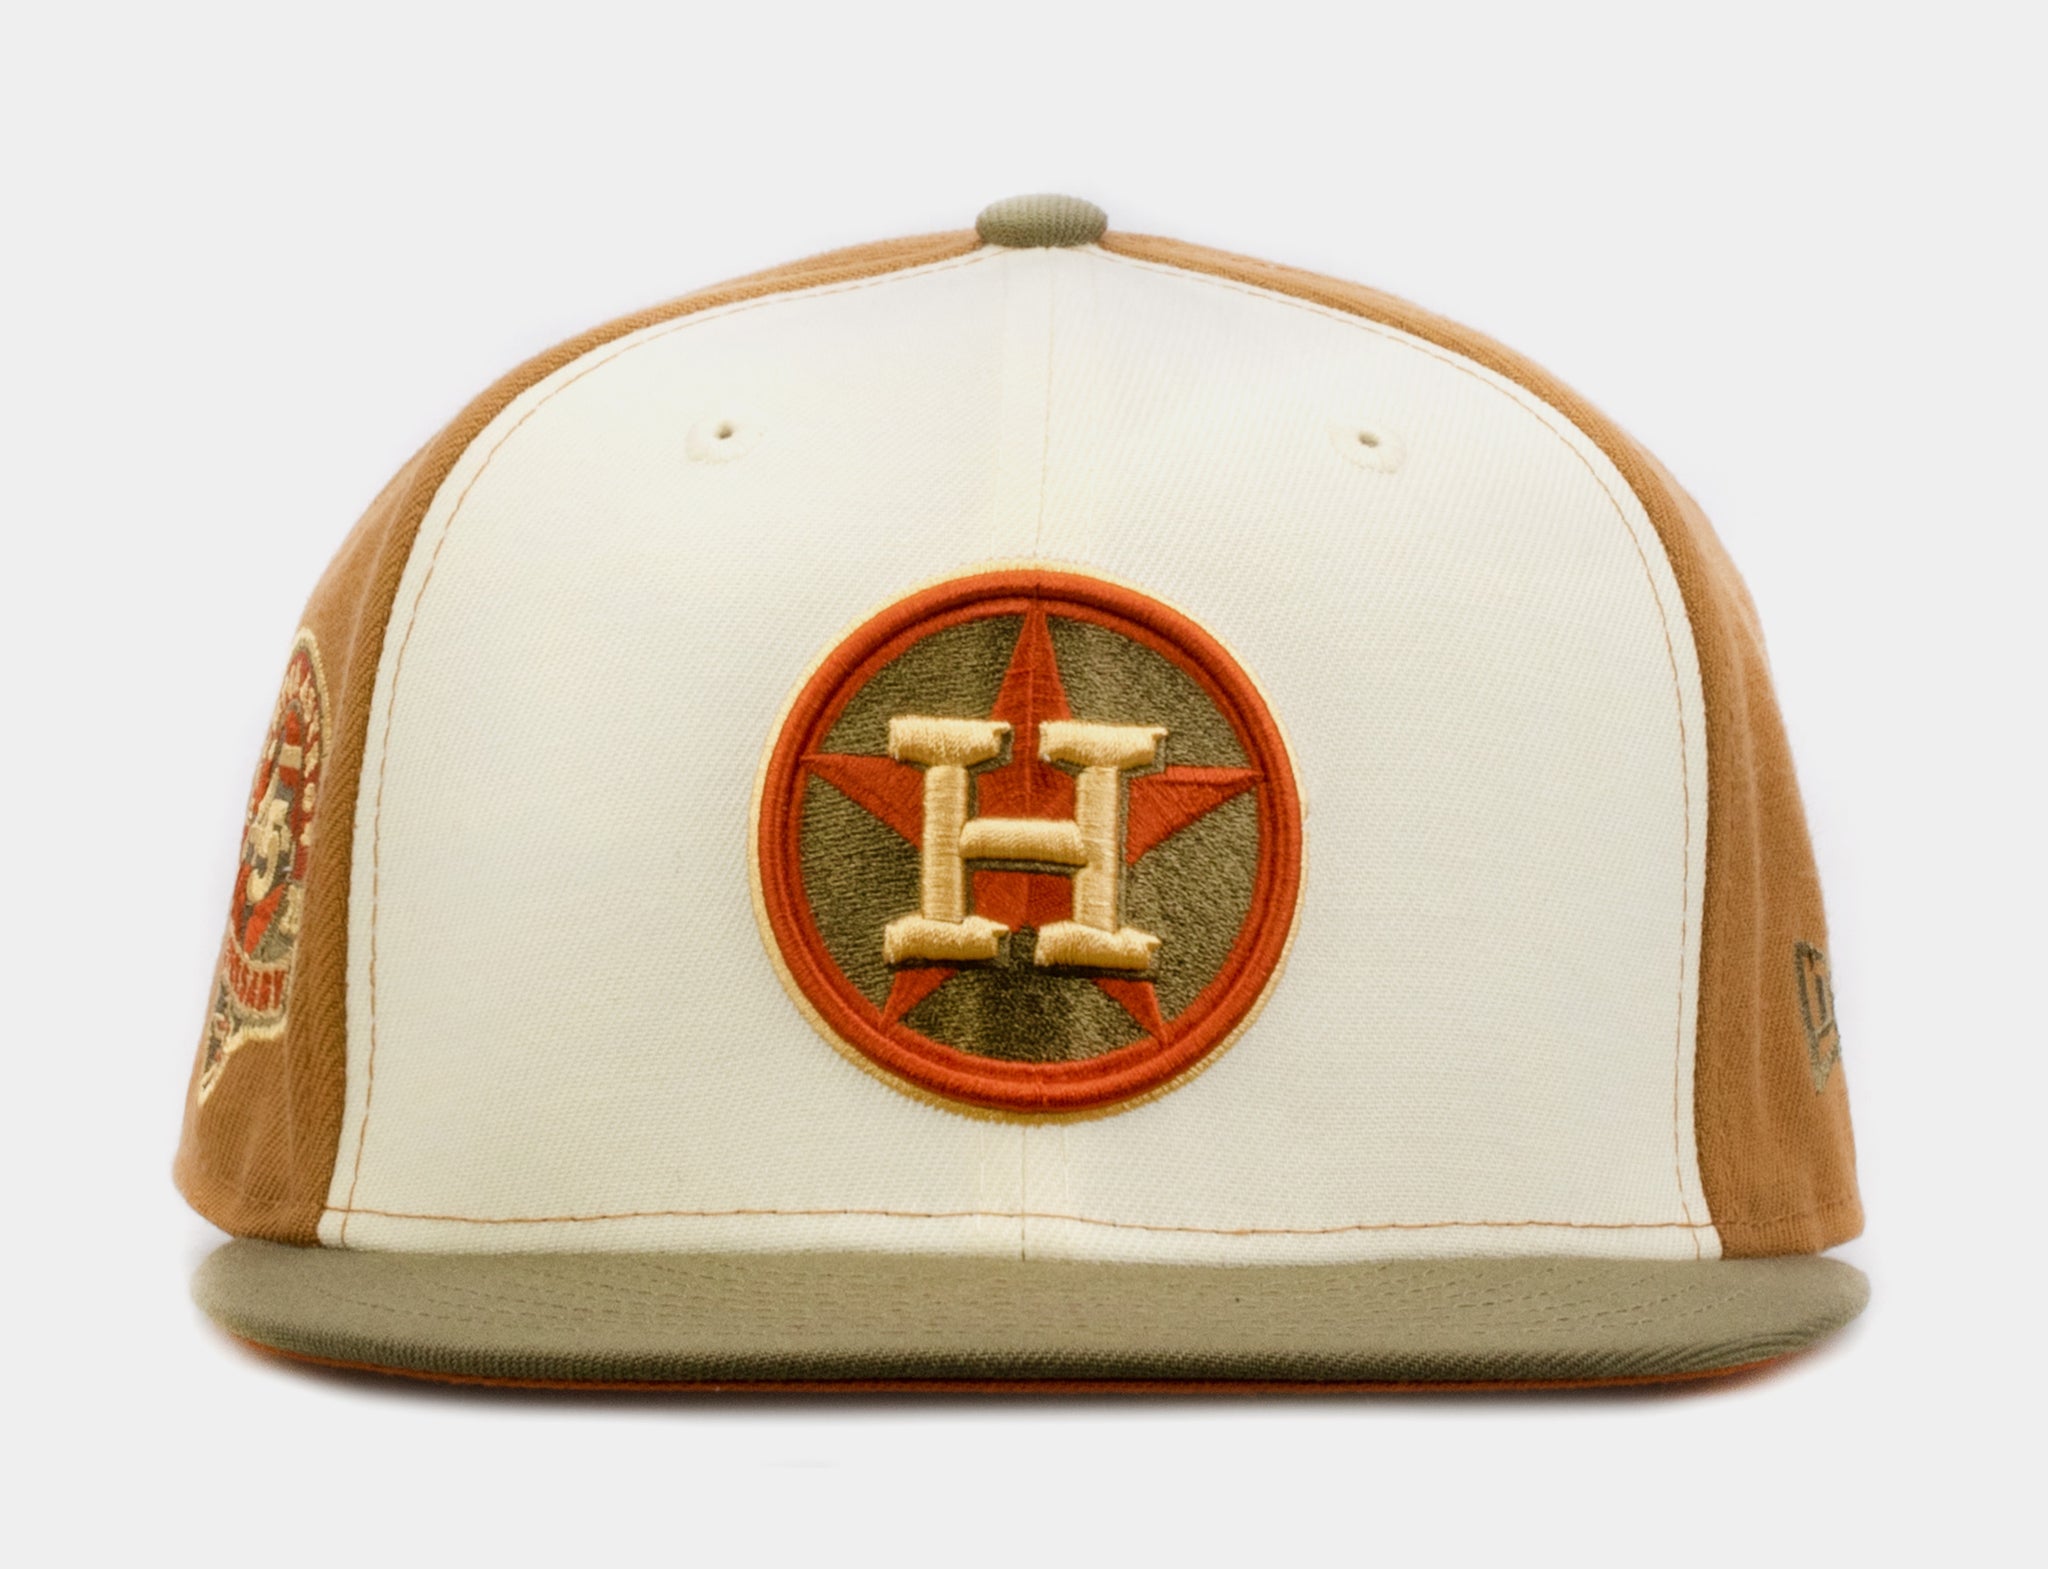 New Era Houston Astros Creme Olive Two Tone Edition 59Fifty Fitted Cap